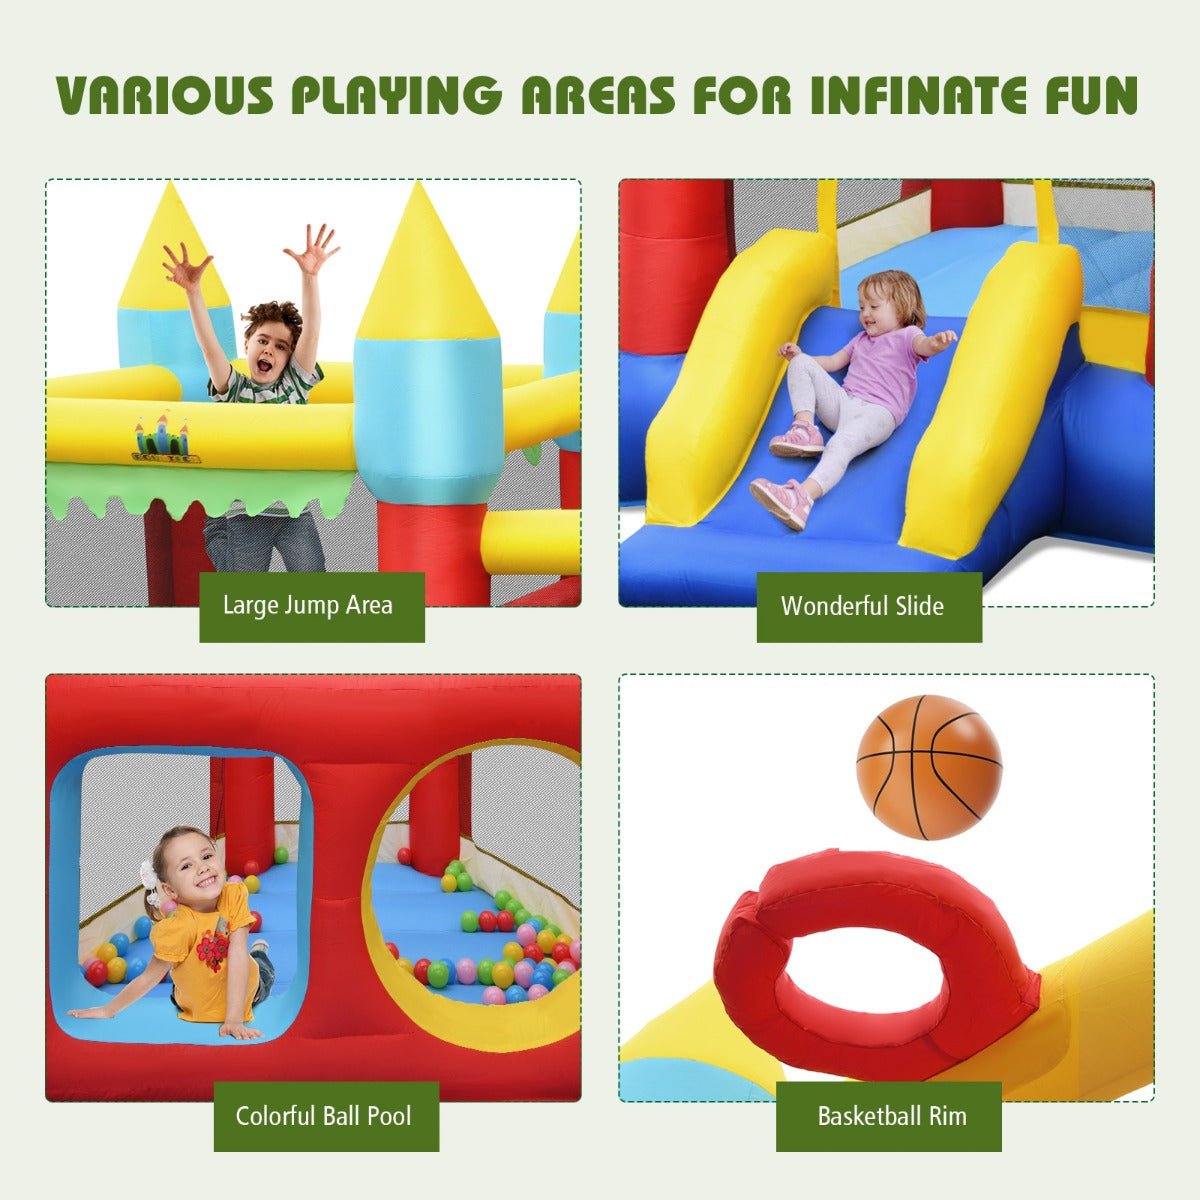 1Inflatable Play Structure with Slide, Basketball & 100 Ocean Balls - Energetic Fun